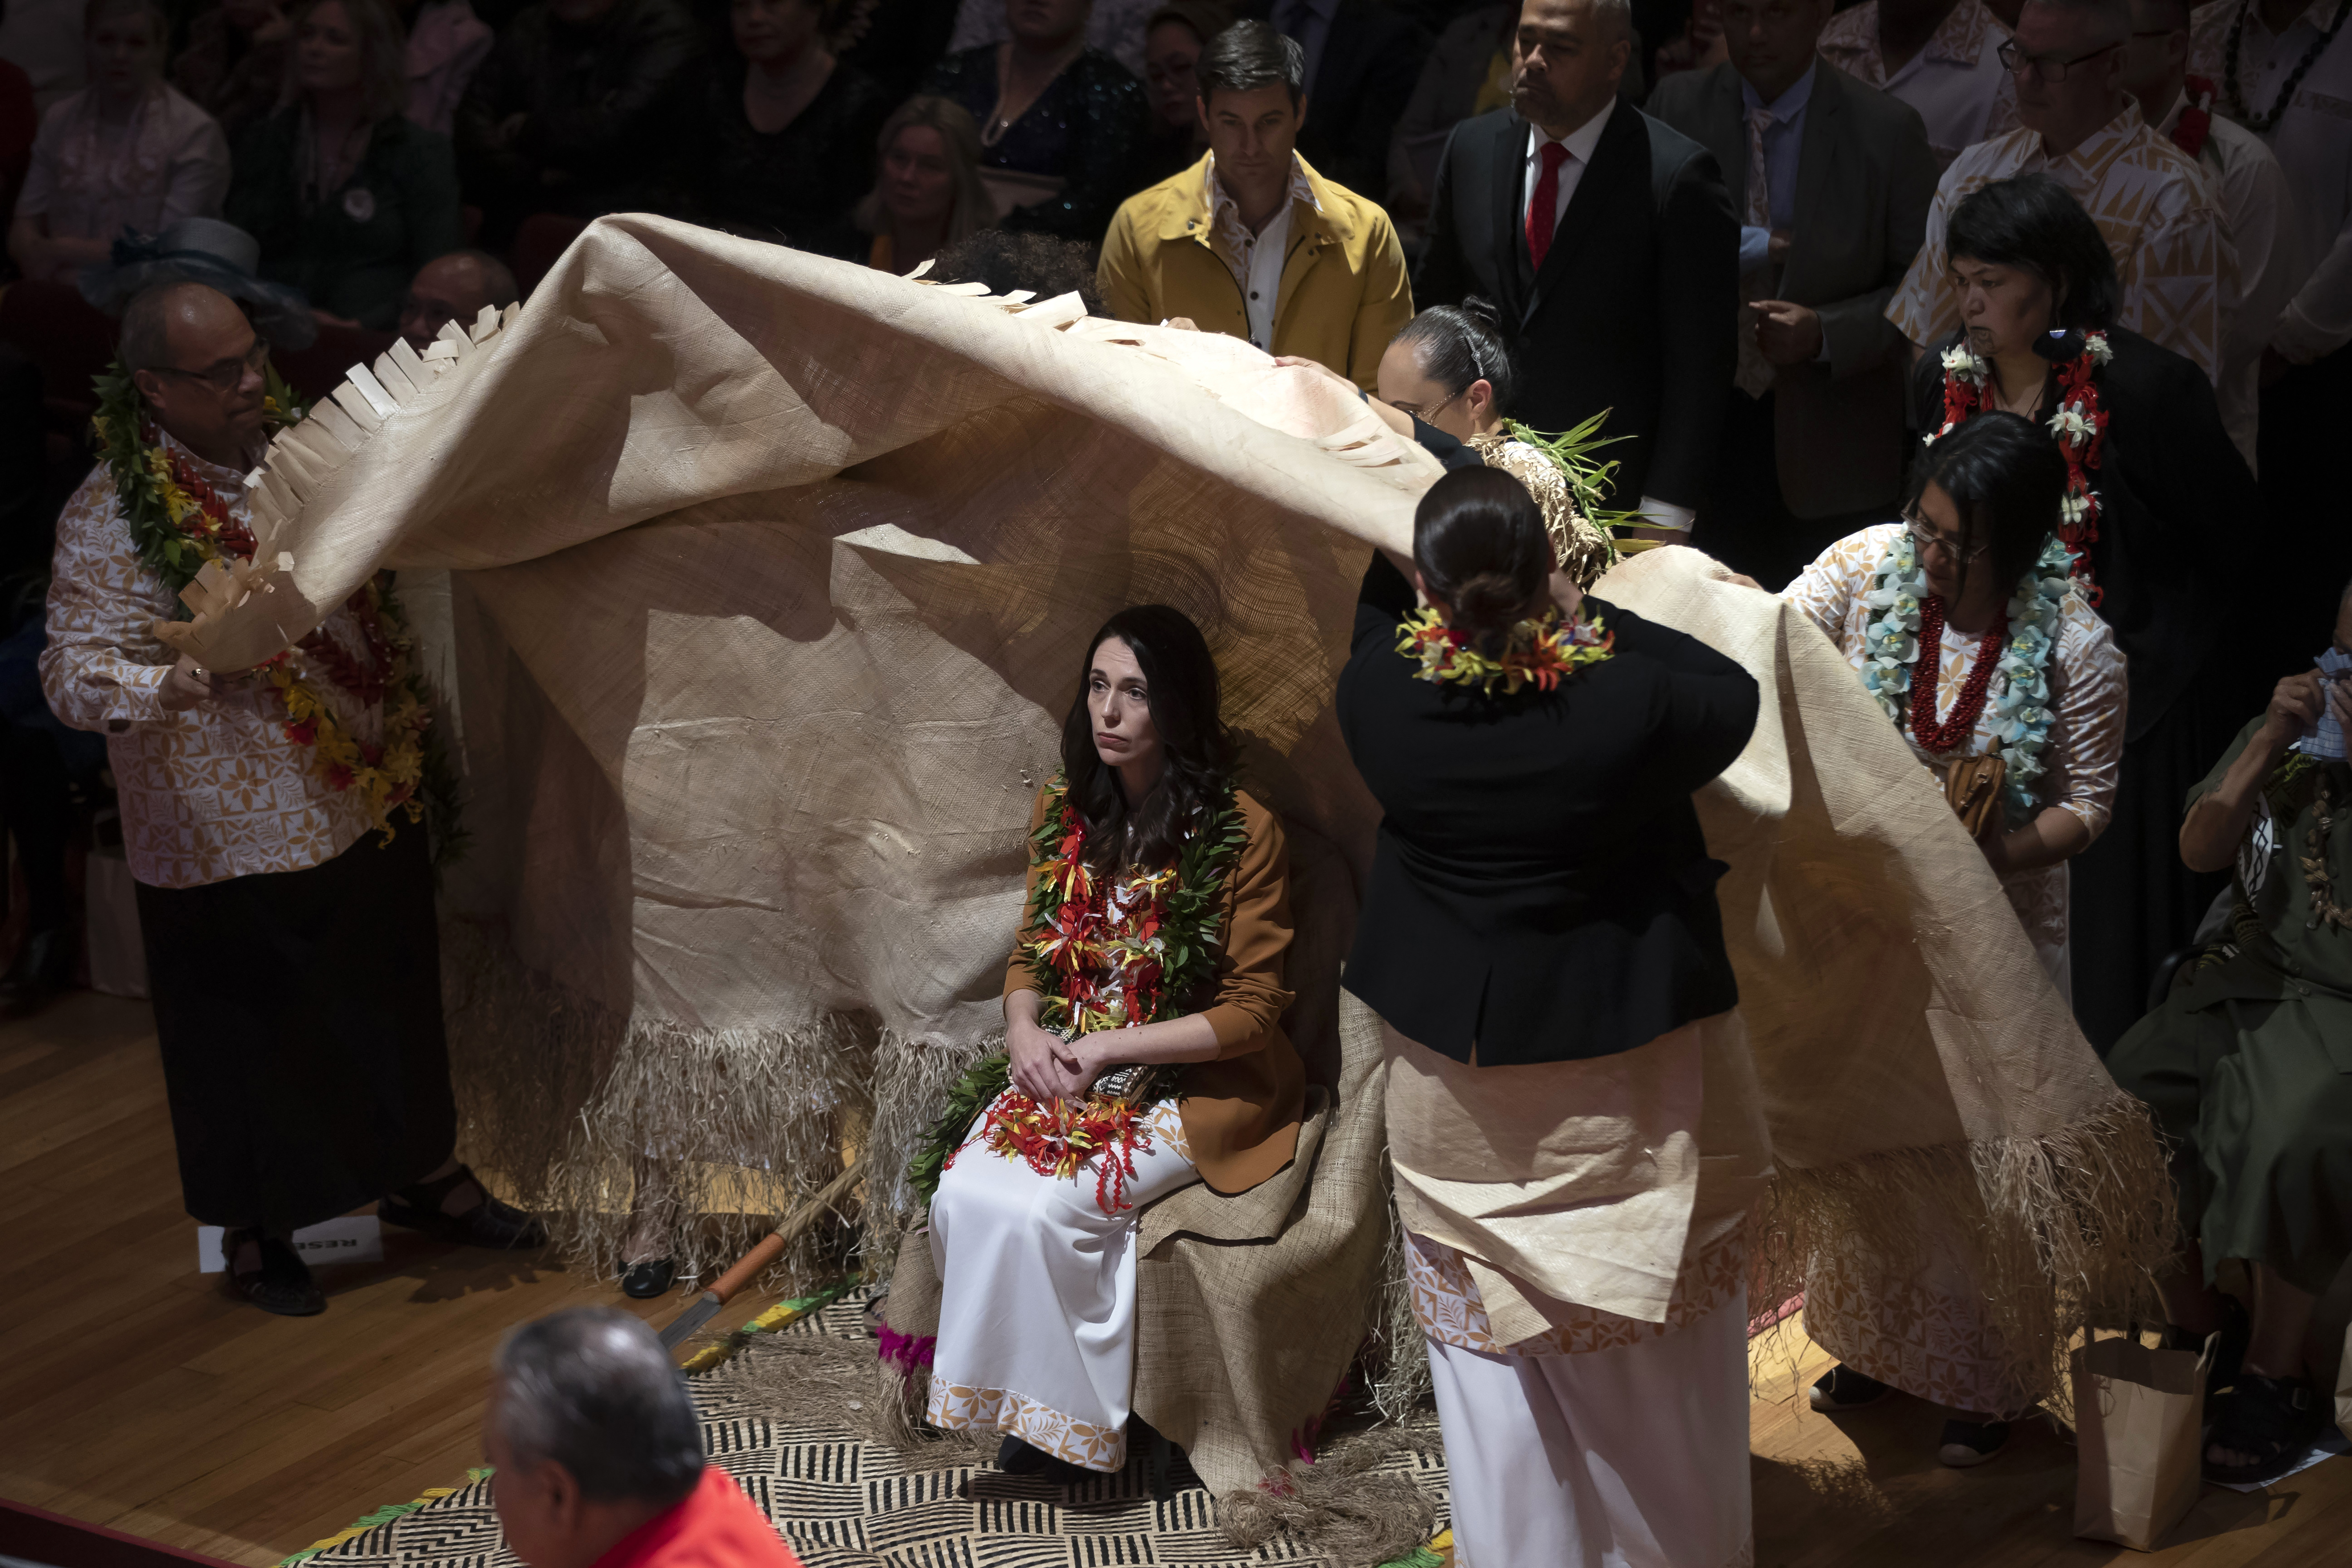 Jacinda Ardern is covered during the ceremony in Auckland